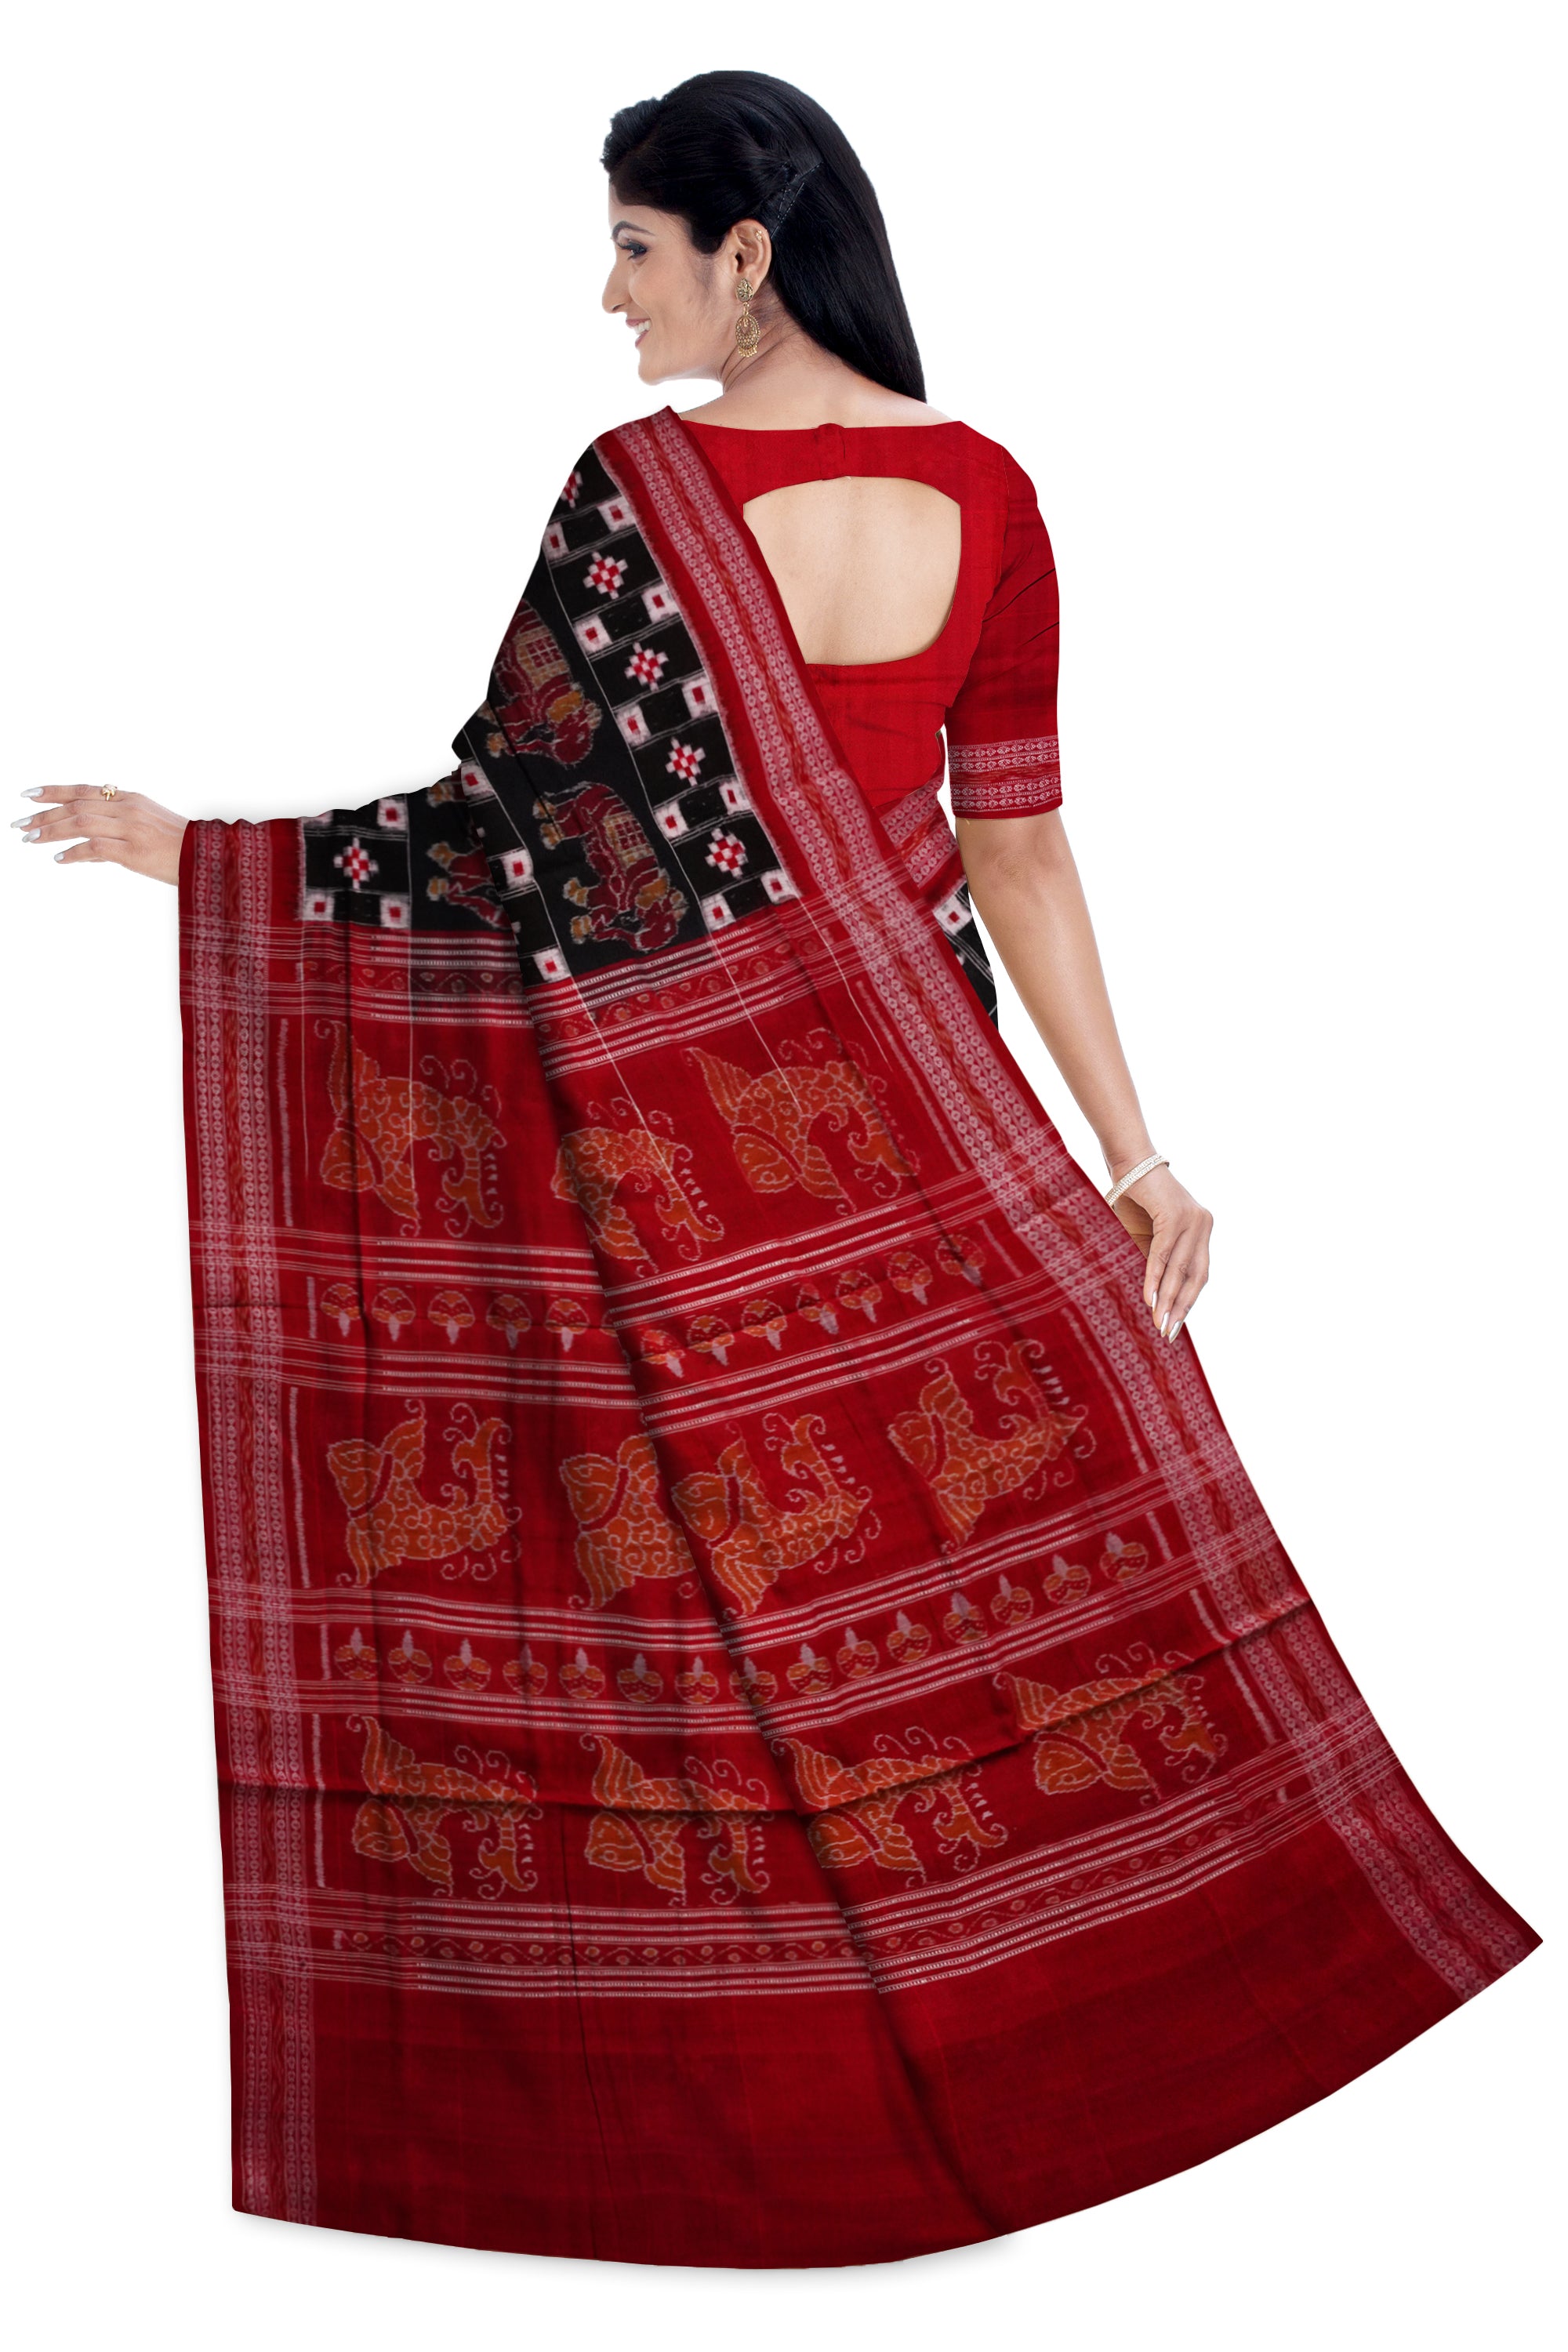 Elephant and Pasapali design in full body pure cotton saree in Black and Red color. - Koshali Arts & Crafts Enterprise